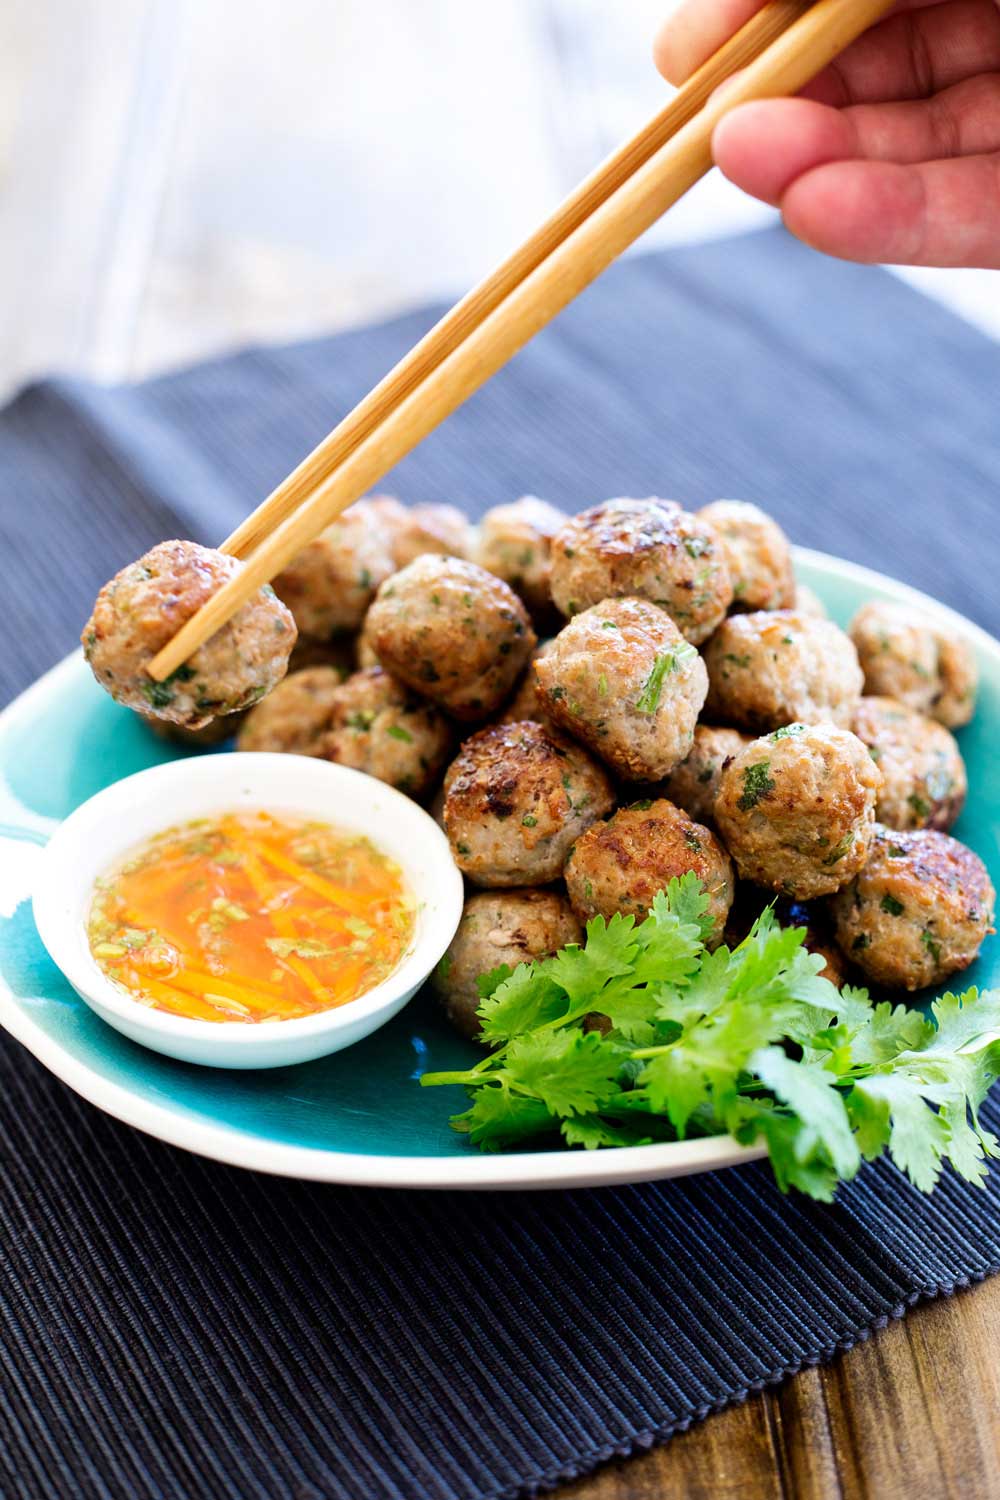 These Thai Pork Meatballs are flavour bombs! Fabulous thai flavours in easy to eat form! Serve these as a canapé, nibble or appetiser. Or cook them up as part of a Thai banquet. However you make them, make sure you grab a few for yourself as these go quickly.